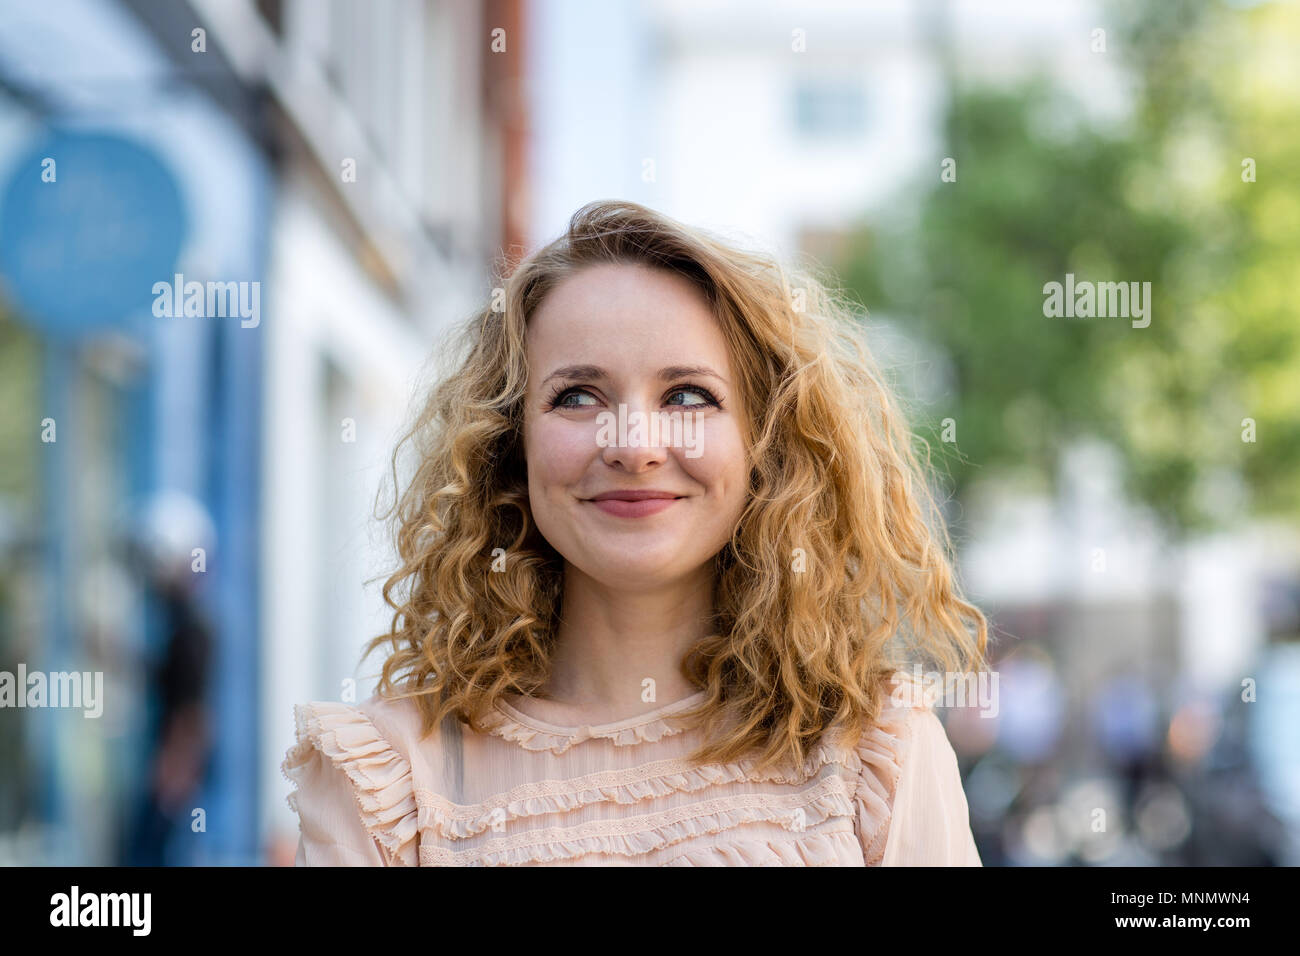 Adult female thinking outdoors in city Stock Photo